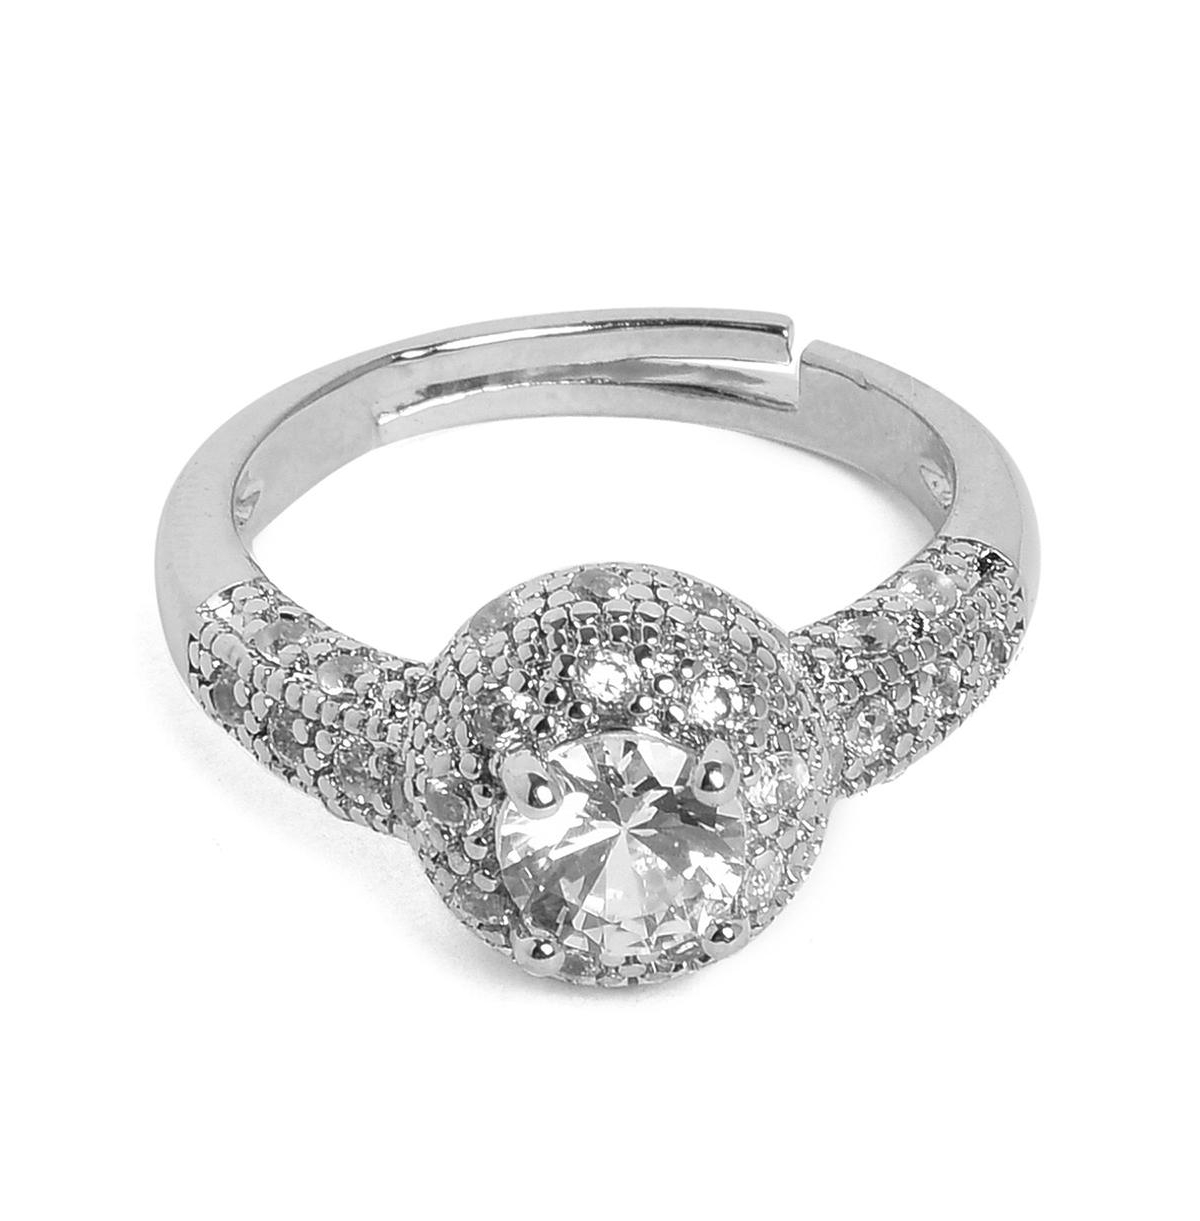 Women's Silver Crystal Cocktail Ring - Silver